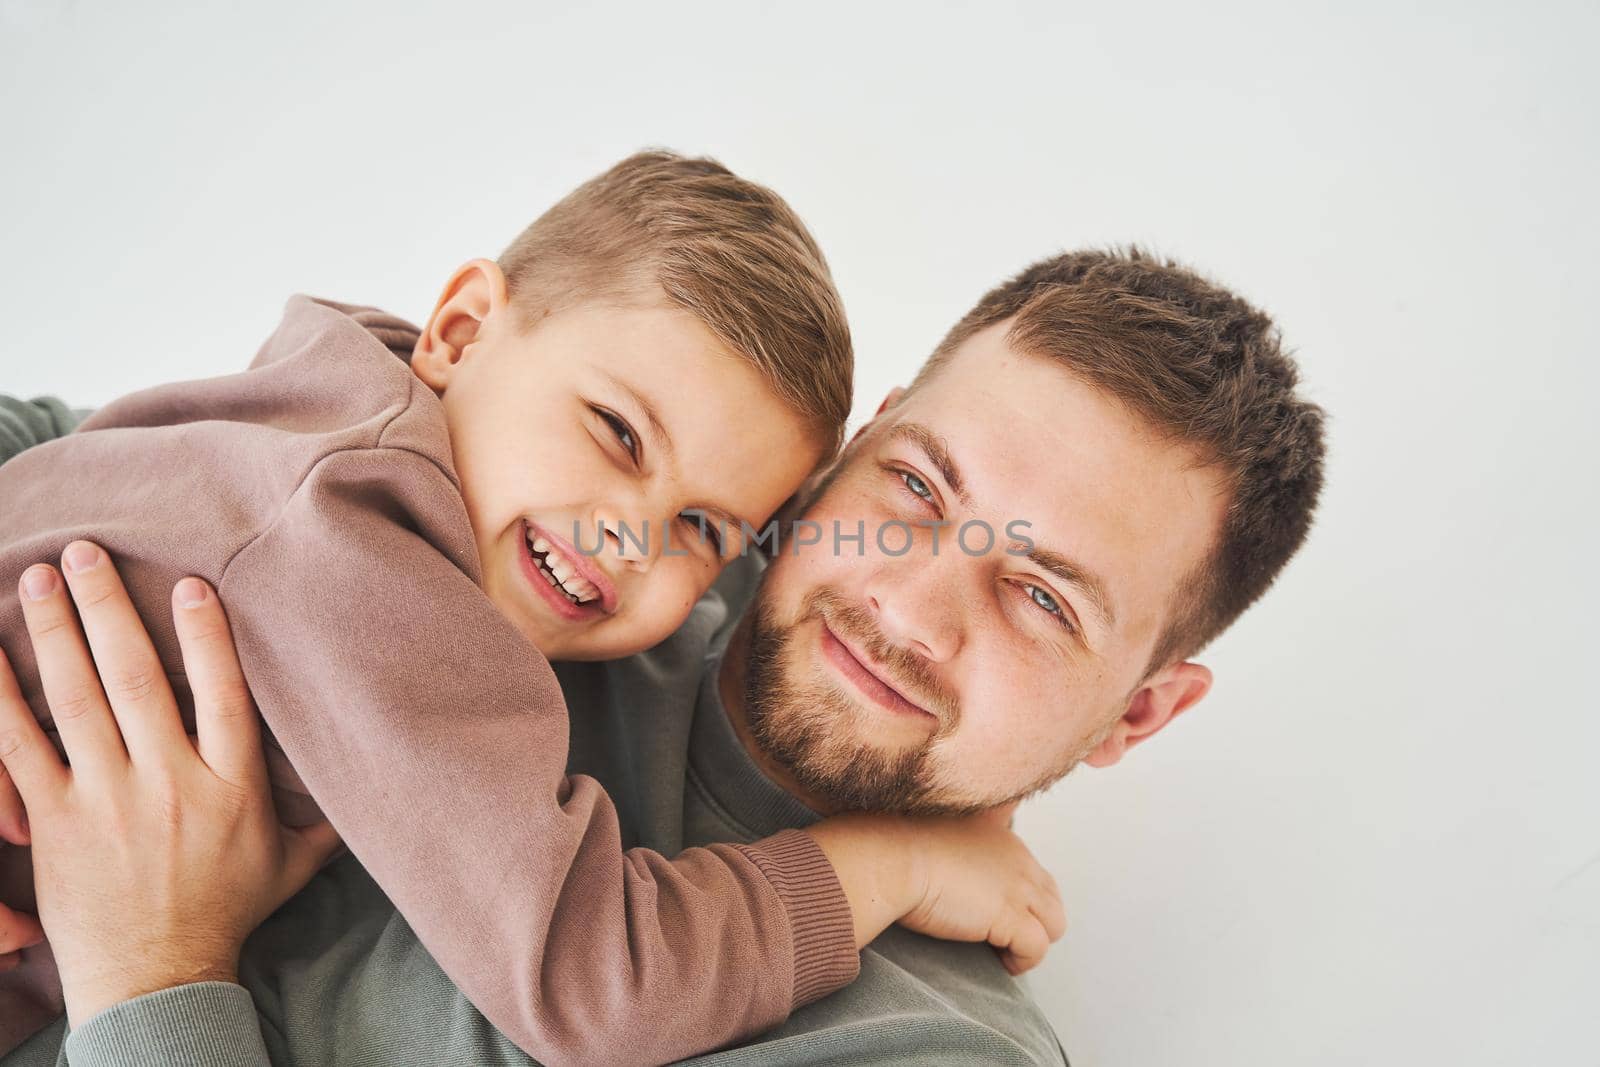 Close-up portrait of smiling father and son. Handsome dad and cheerful and emotional kid. Paternity